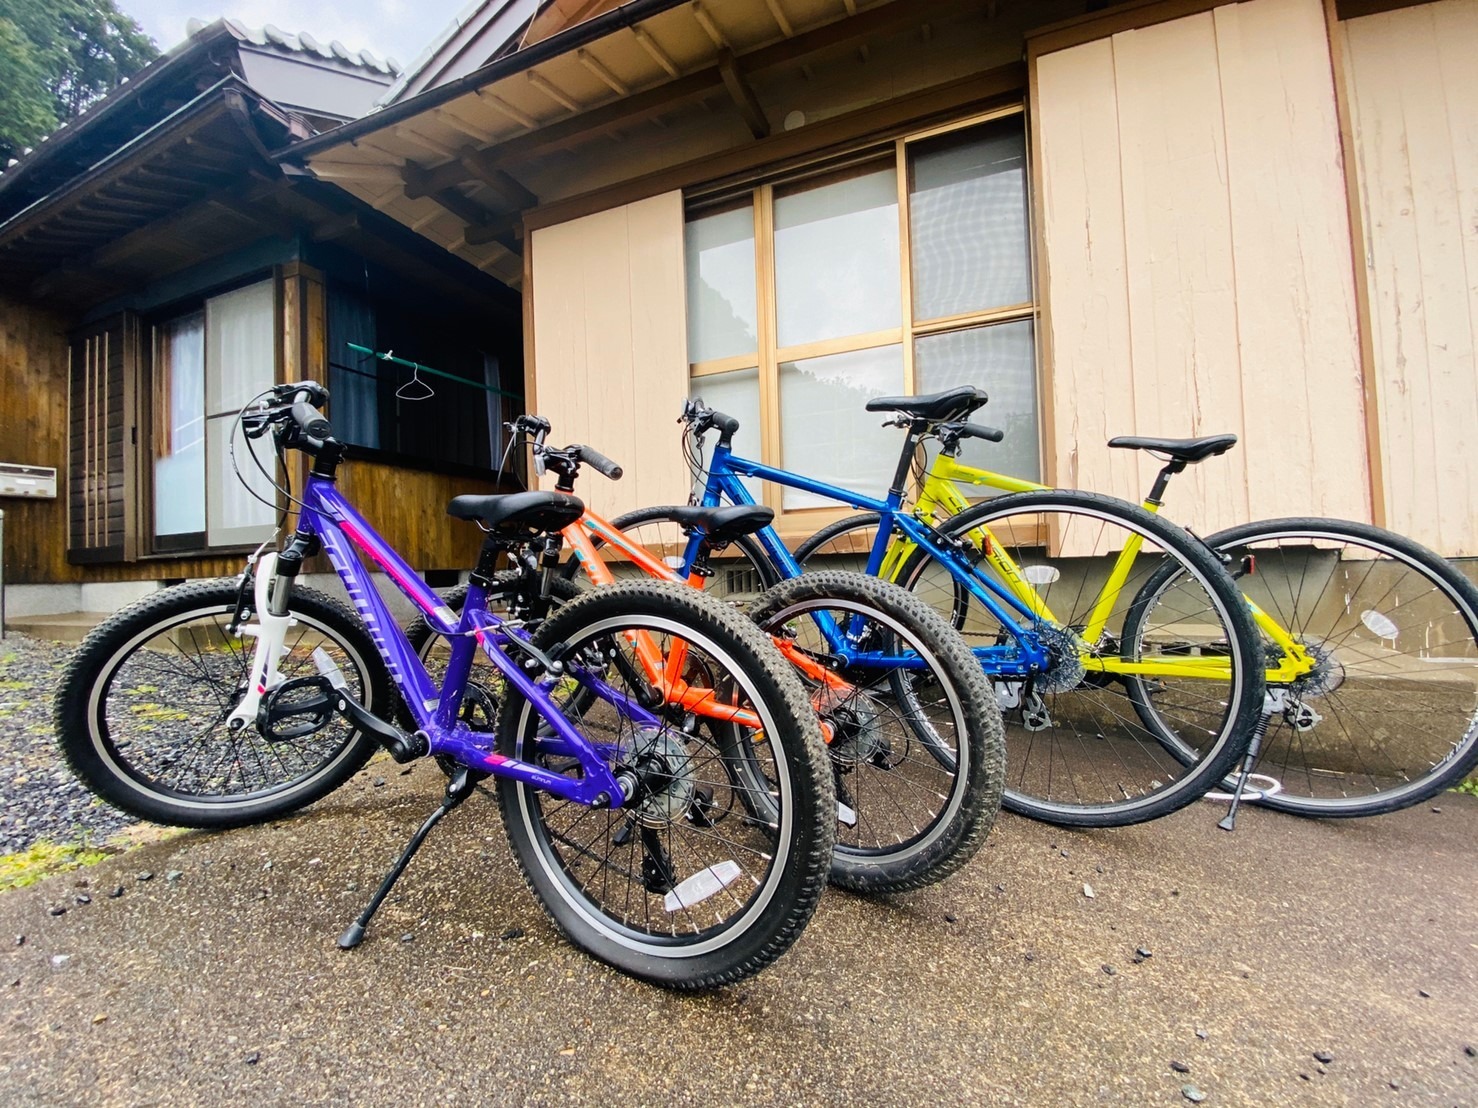 Loaner bicycles are available to tourists.It costs 1,500 yen per day. Please let us know before your arrival if you need. レンタサイクルも用意しています。(一日1,500円です。)ご利用の際は事前にお知らせください。